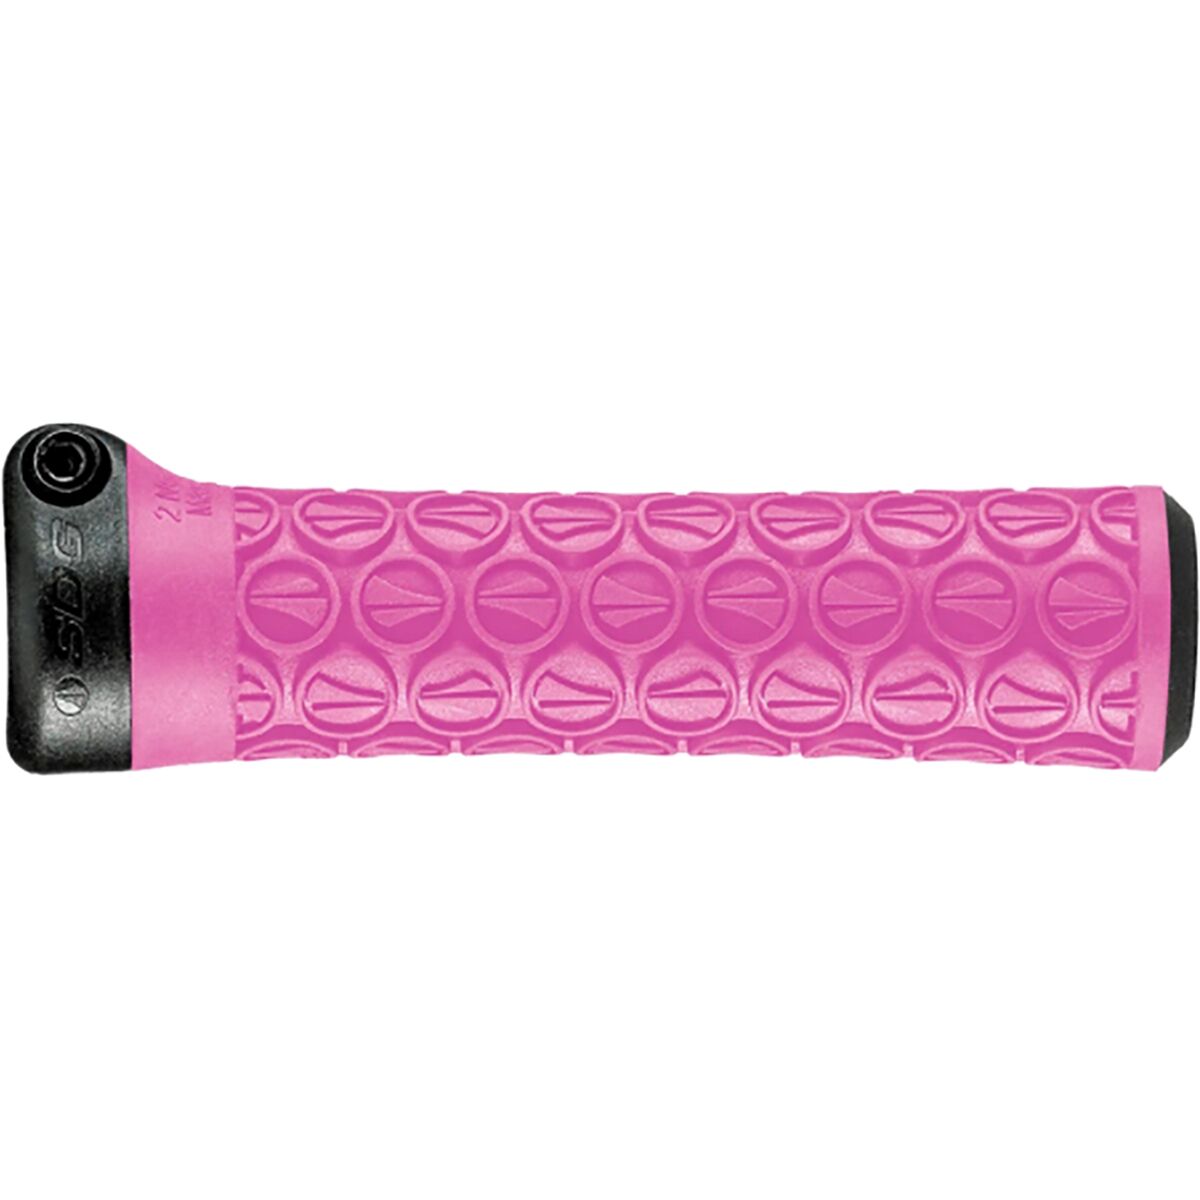 SDG Components Slater JR Lock On Grips Neon Pink, One Size